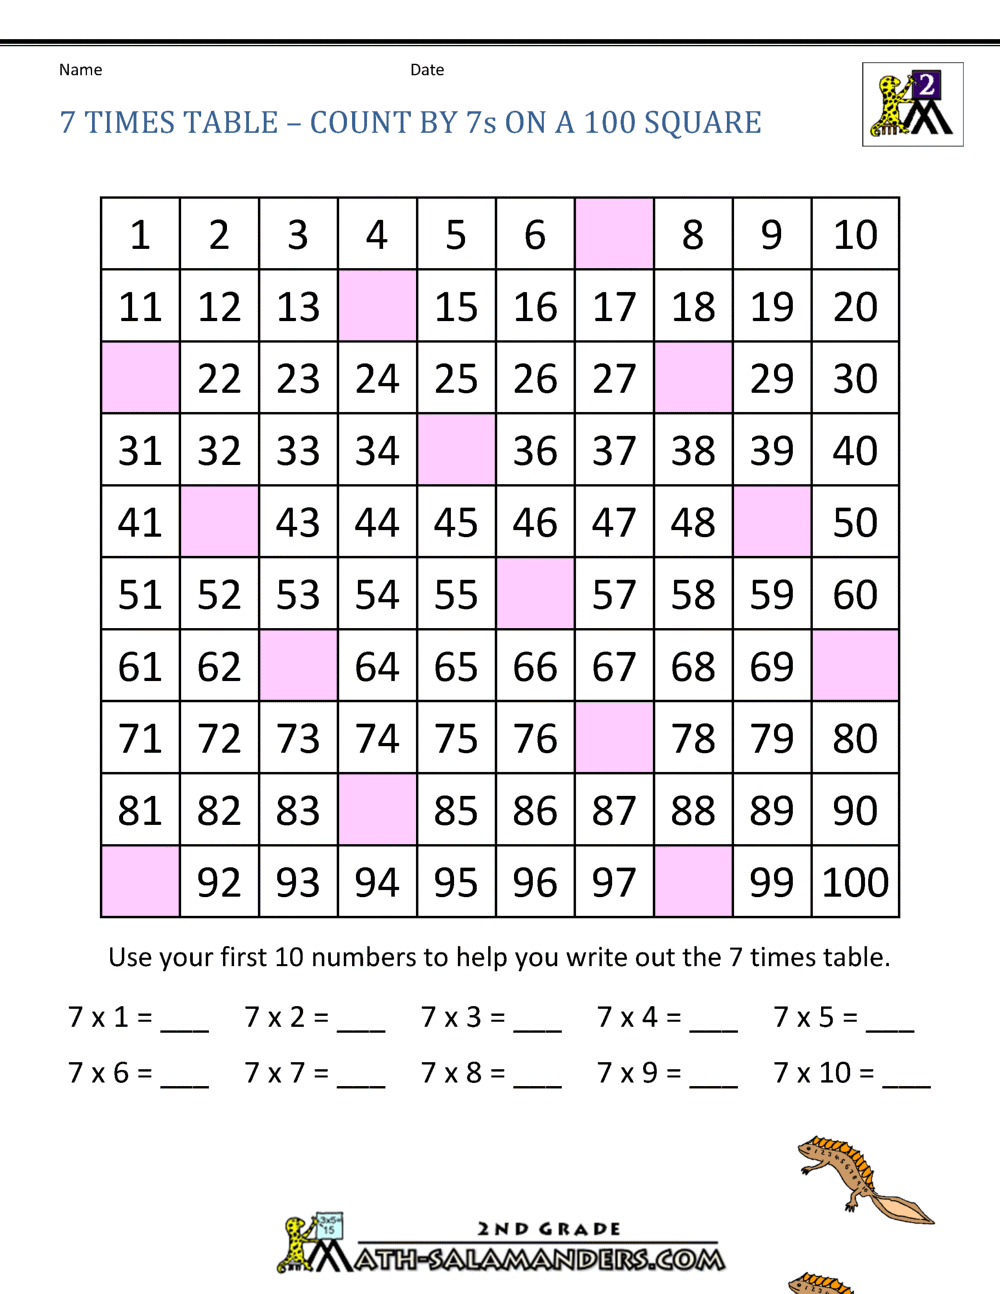 Count By 7 Chart